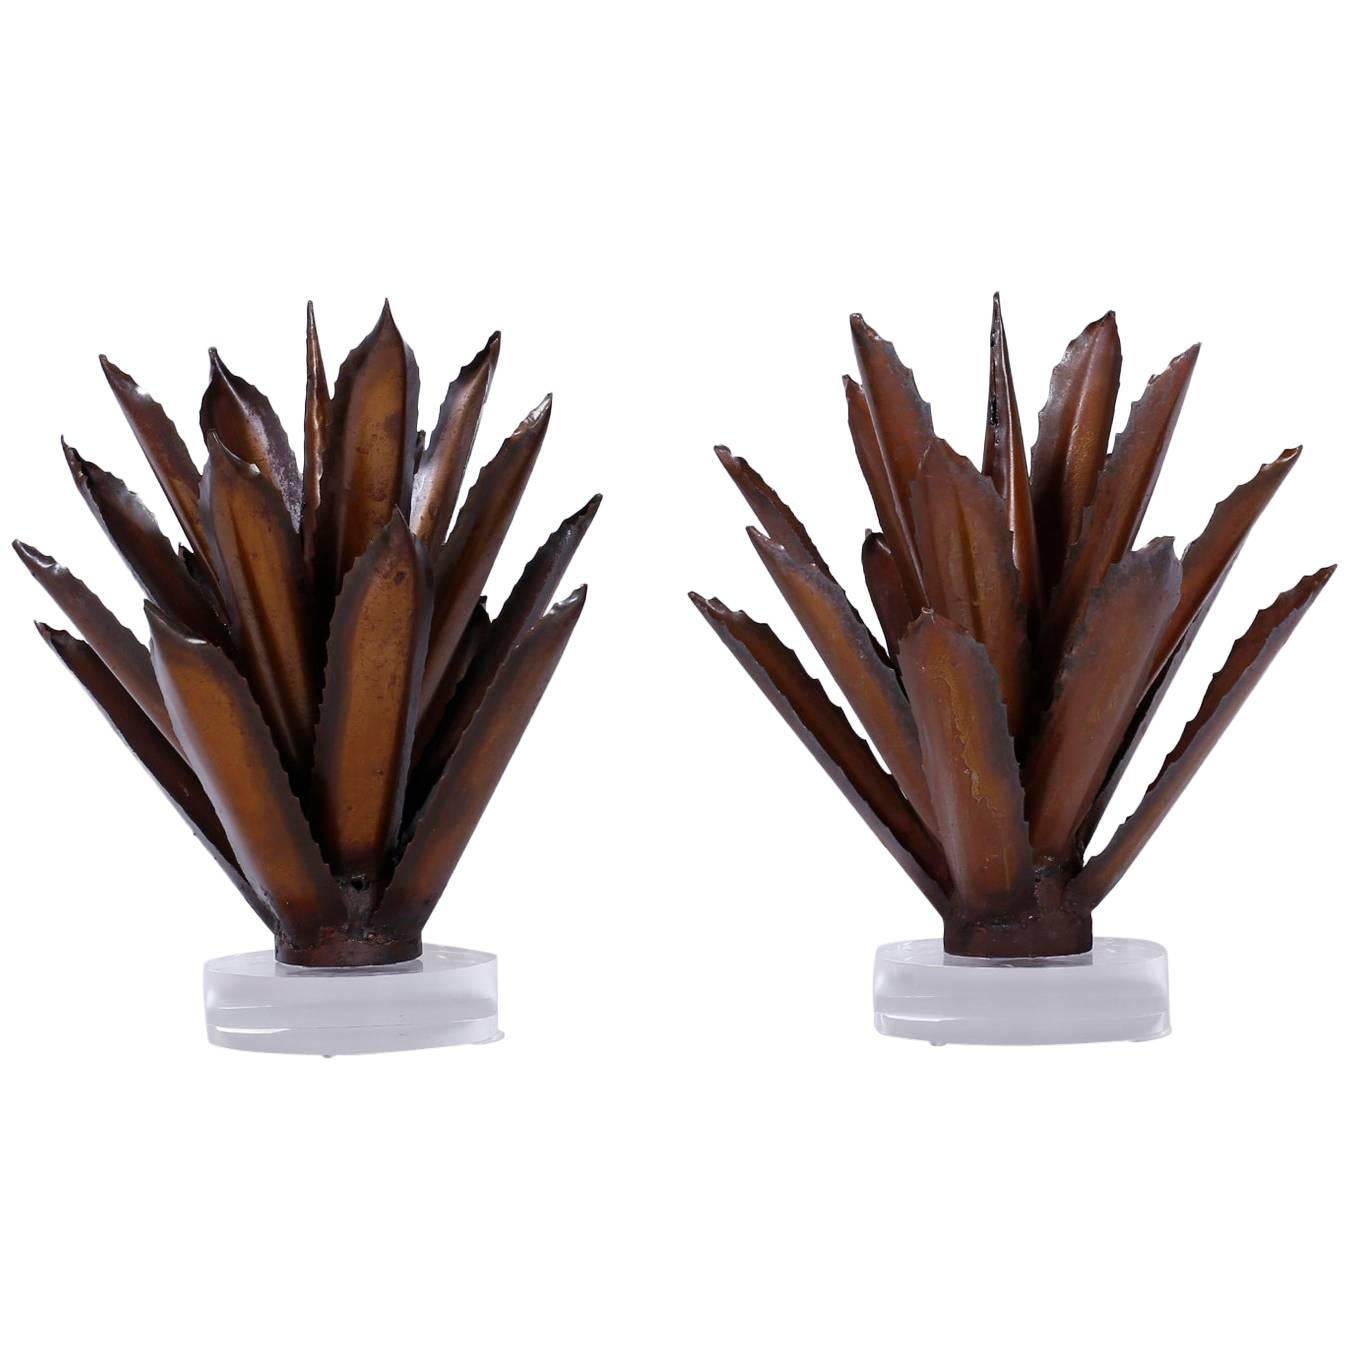 Pair of Agave Plant Sculptures